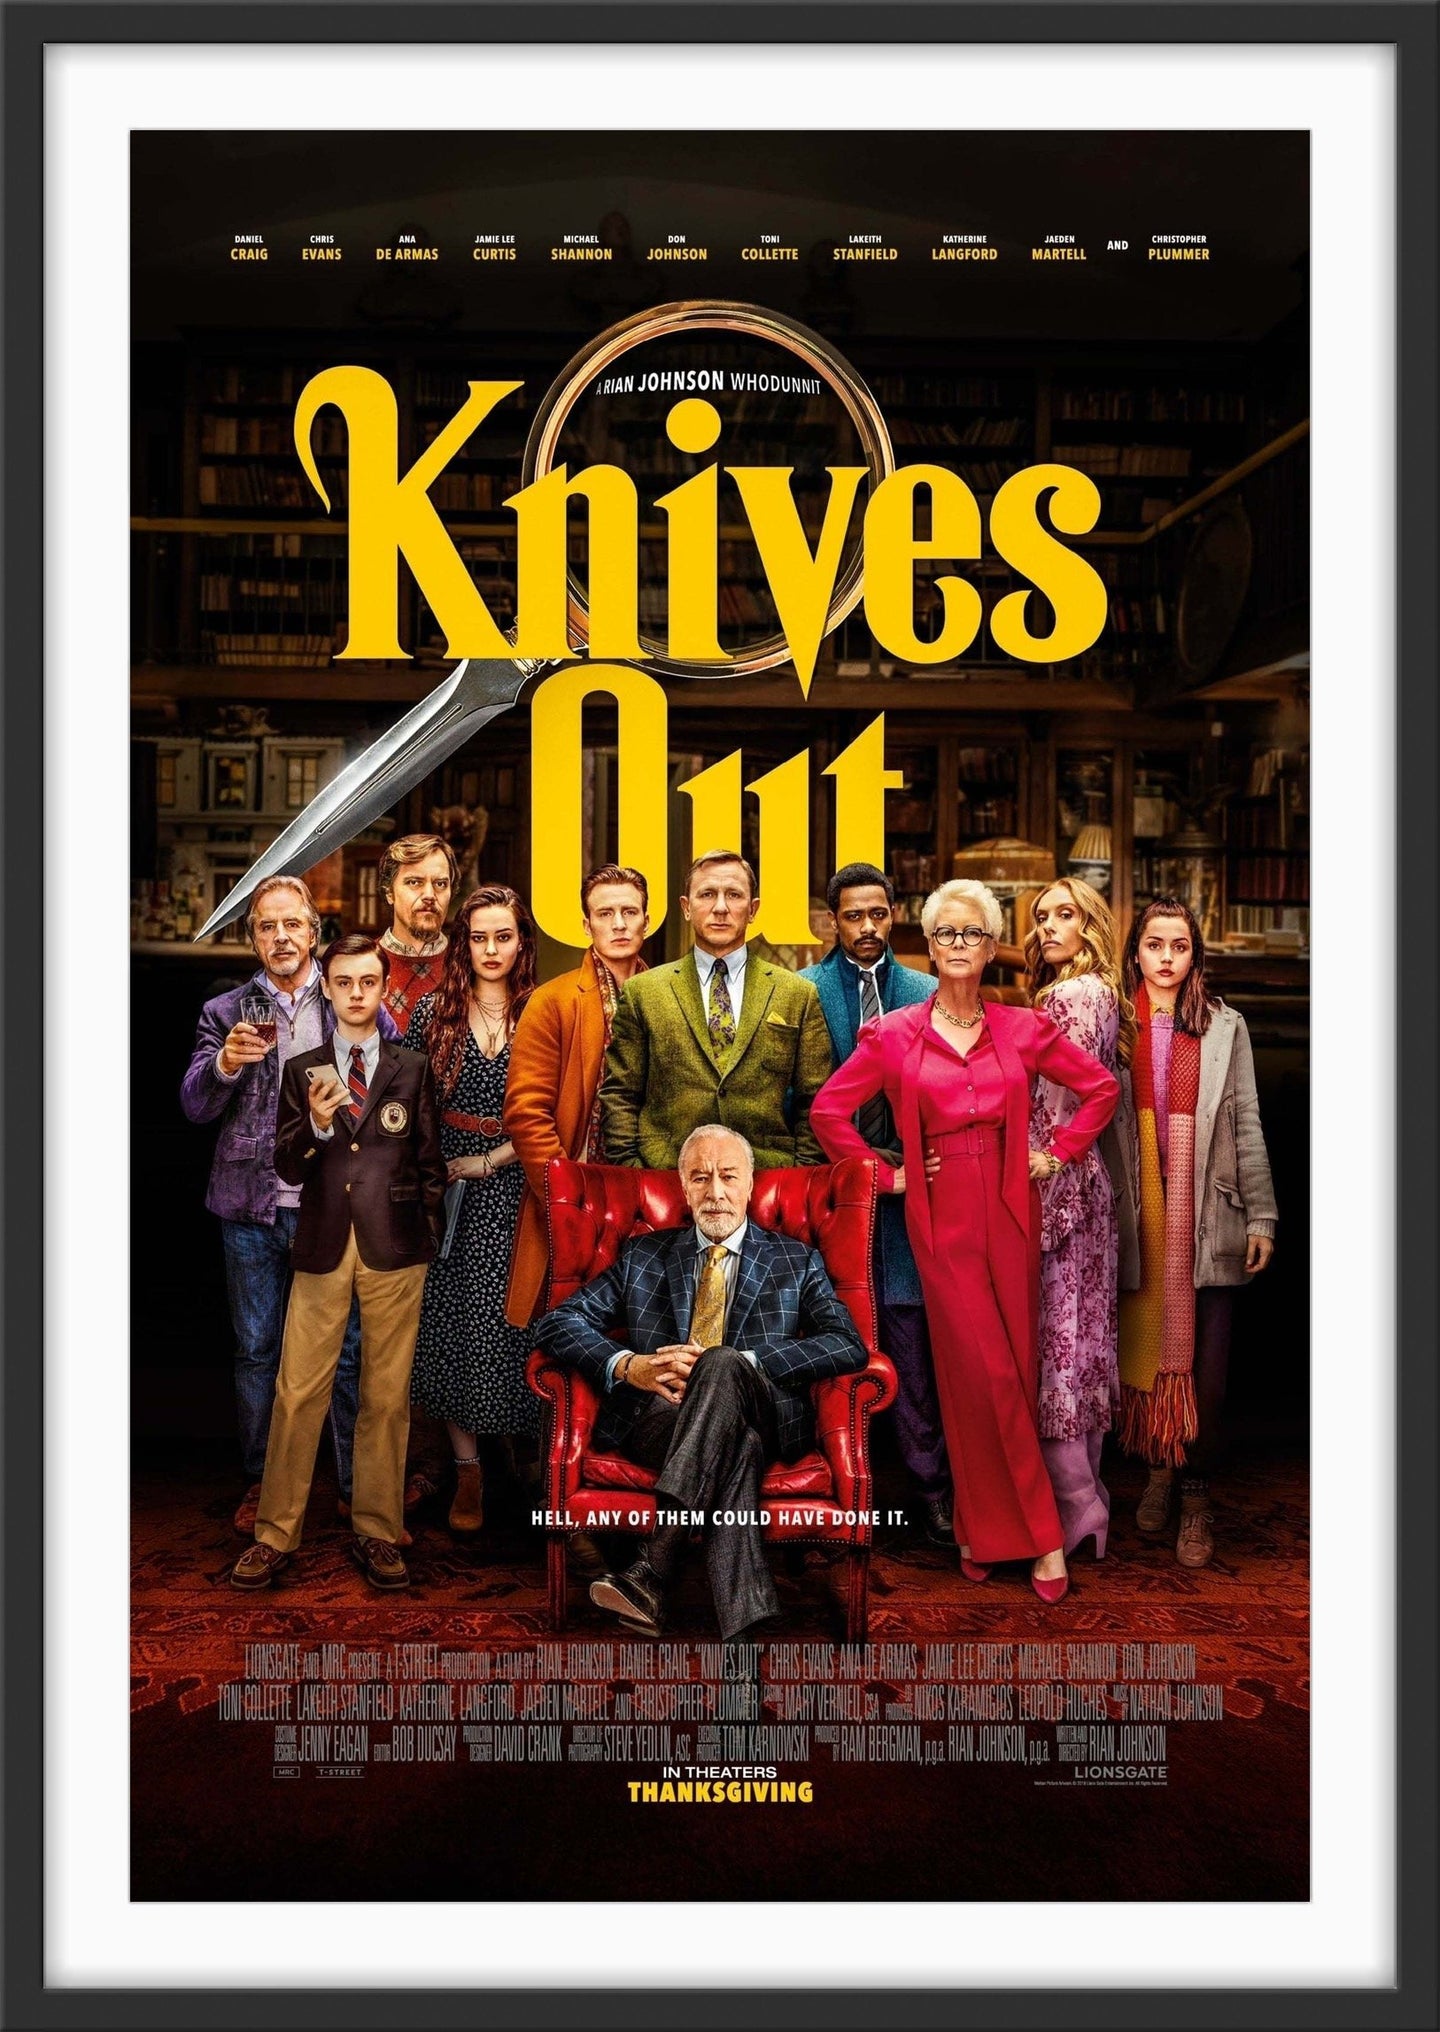 An original movie poster for the film Knives Out